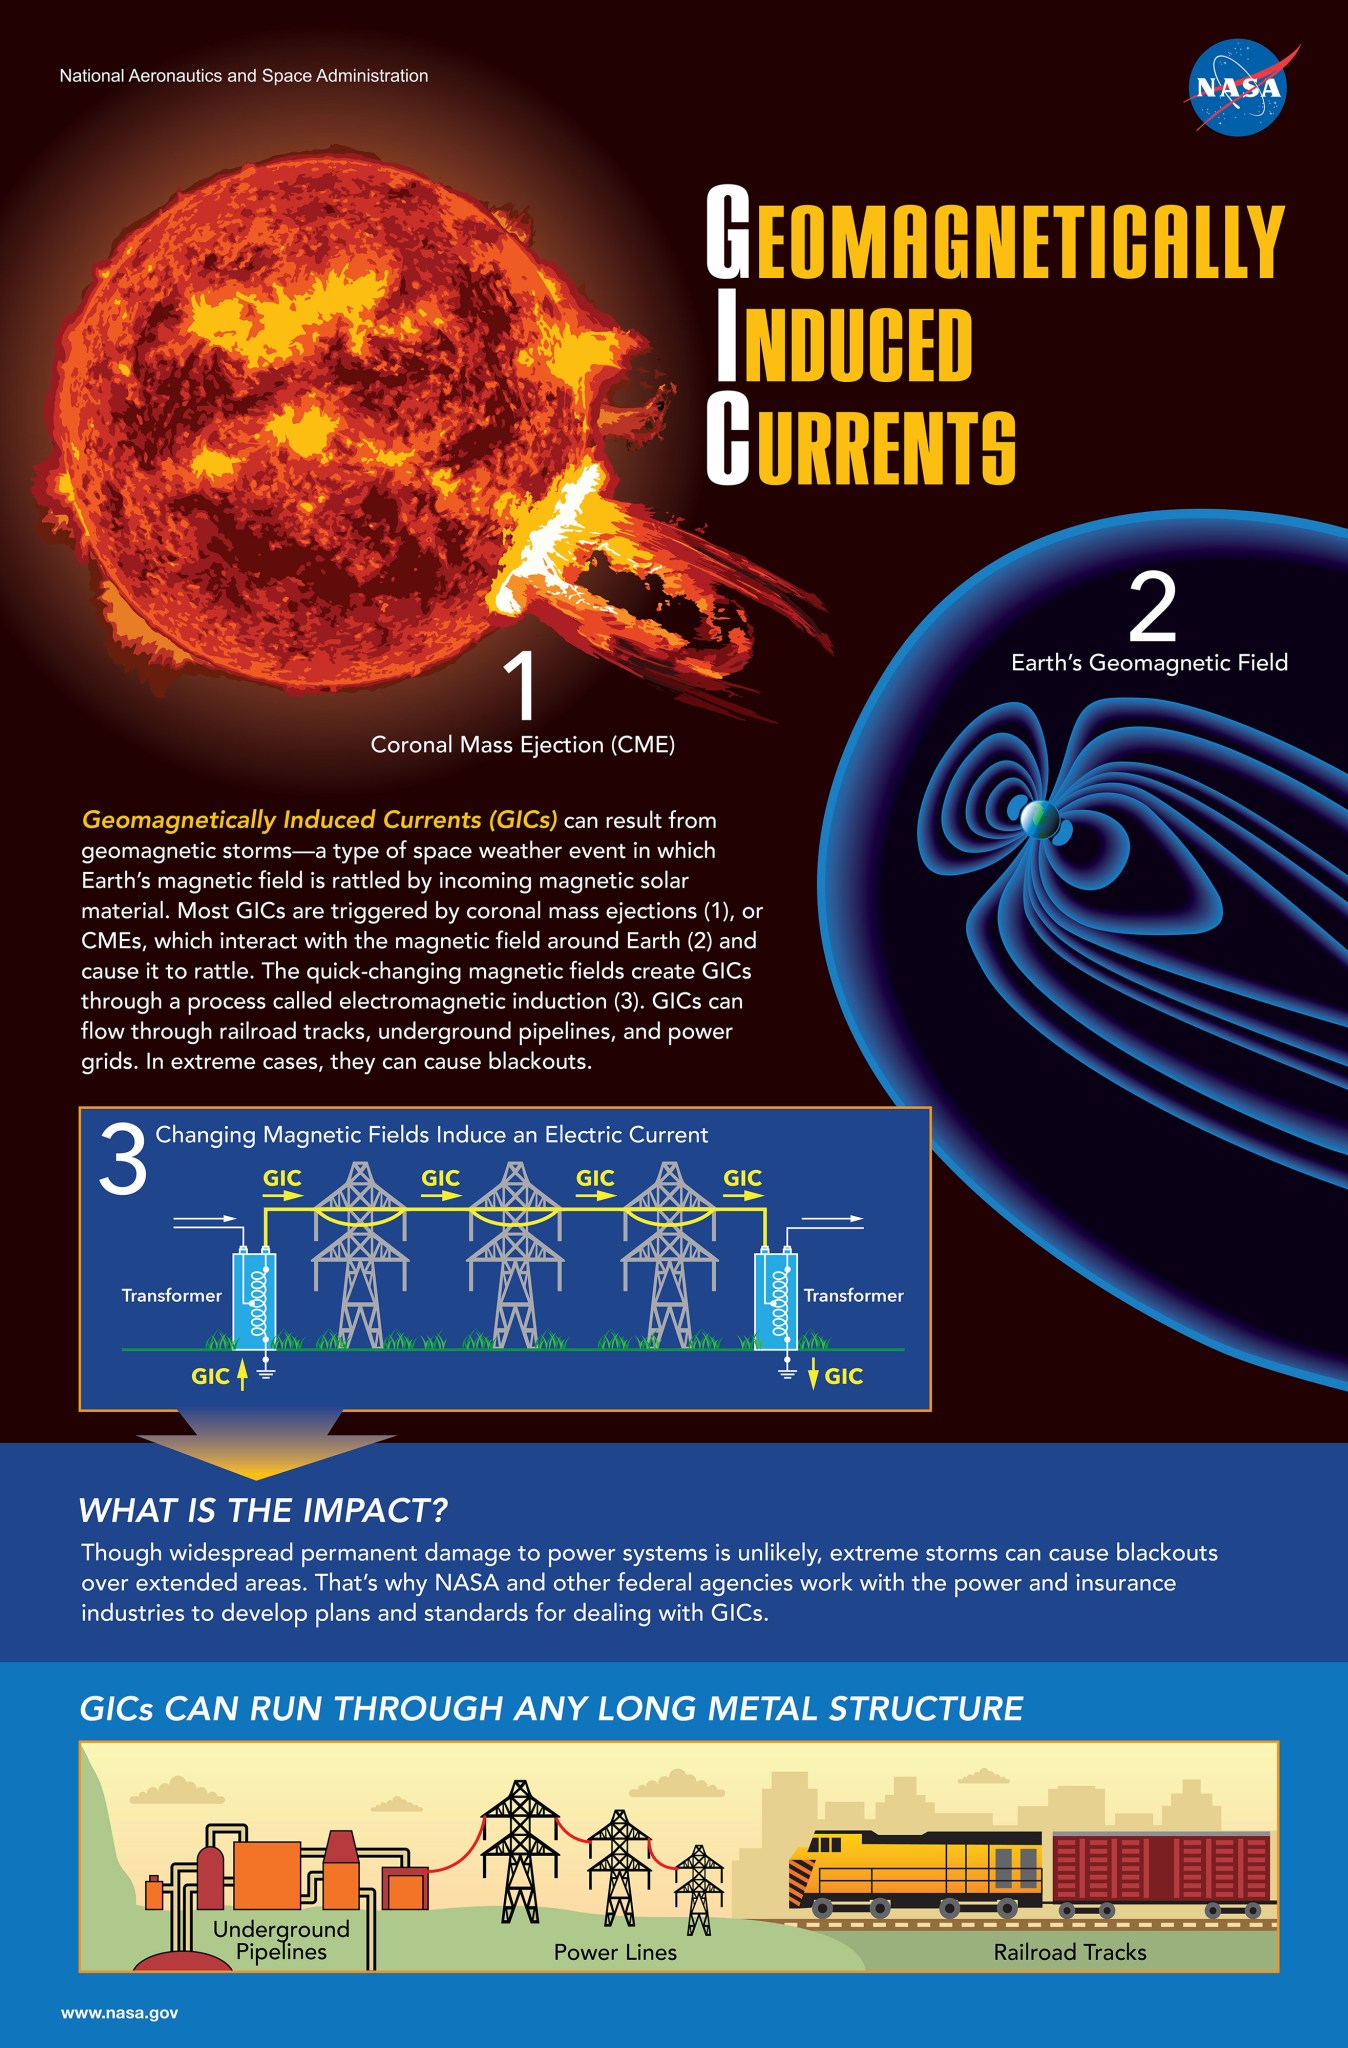 infographic describing Geomagnetically Induced Currents, or GICs